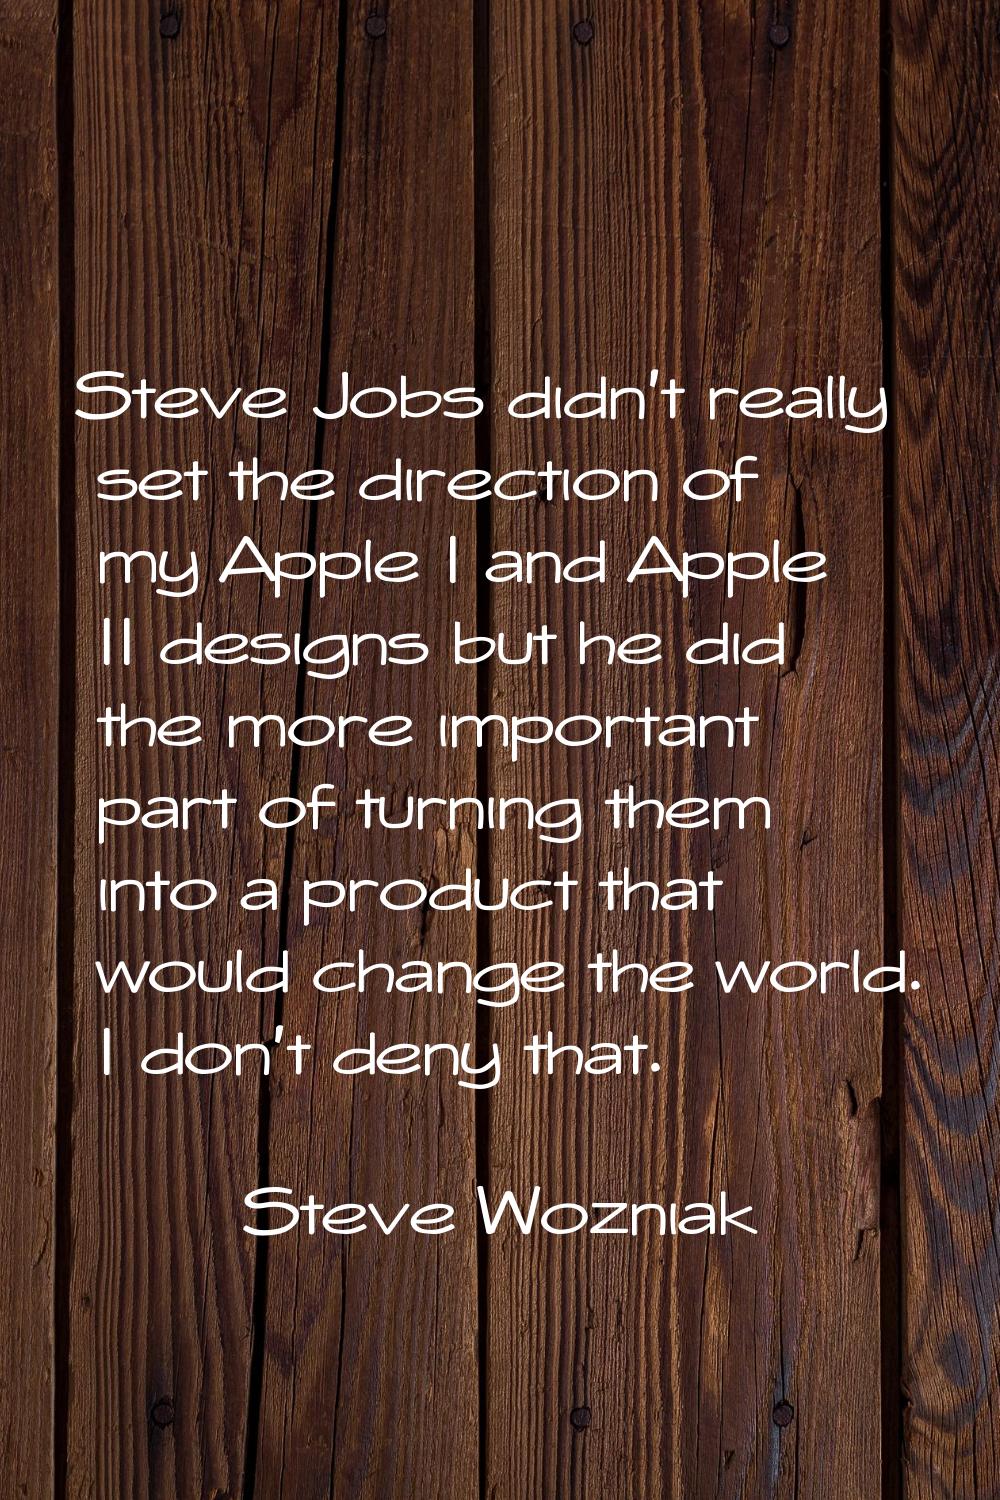 Steve Jobs didn't really set the direction of my Apple I and Apple II designs but he did the more i